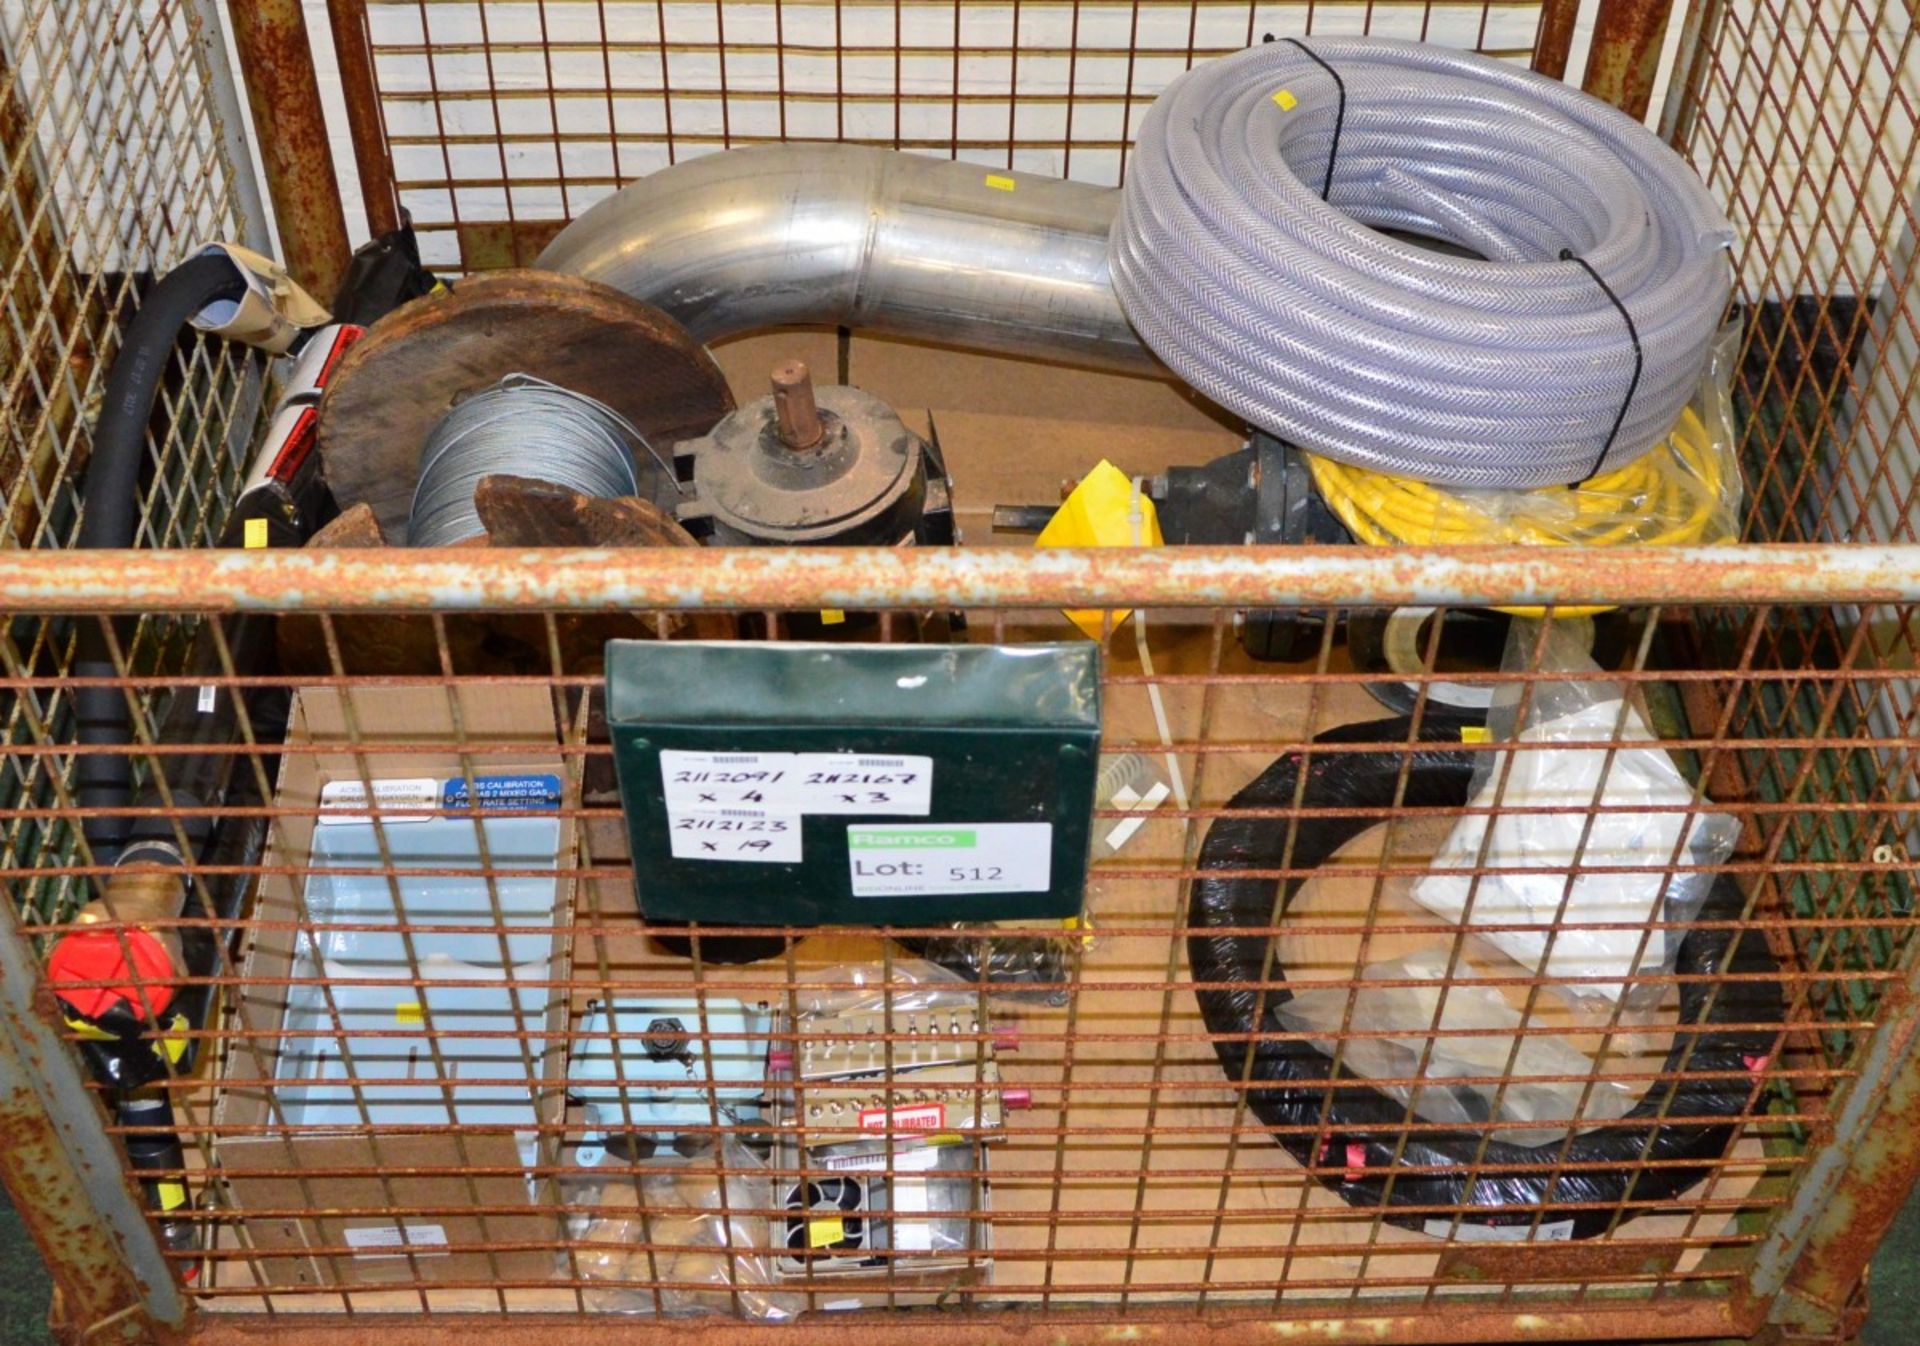 Motor, Wire Rope, Red Beacon. Hose, Fuses, Small Components. Hoses,Valve, Pipe Fitting, Wa